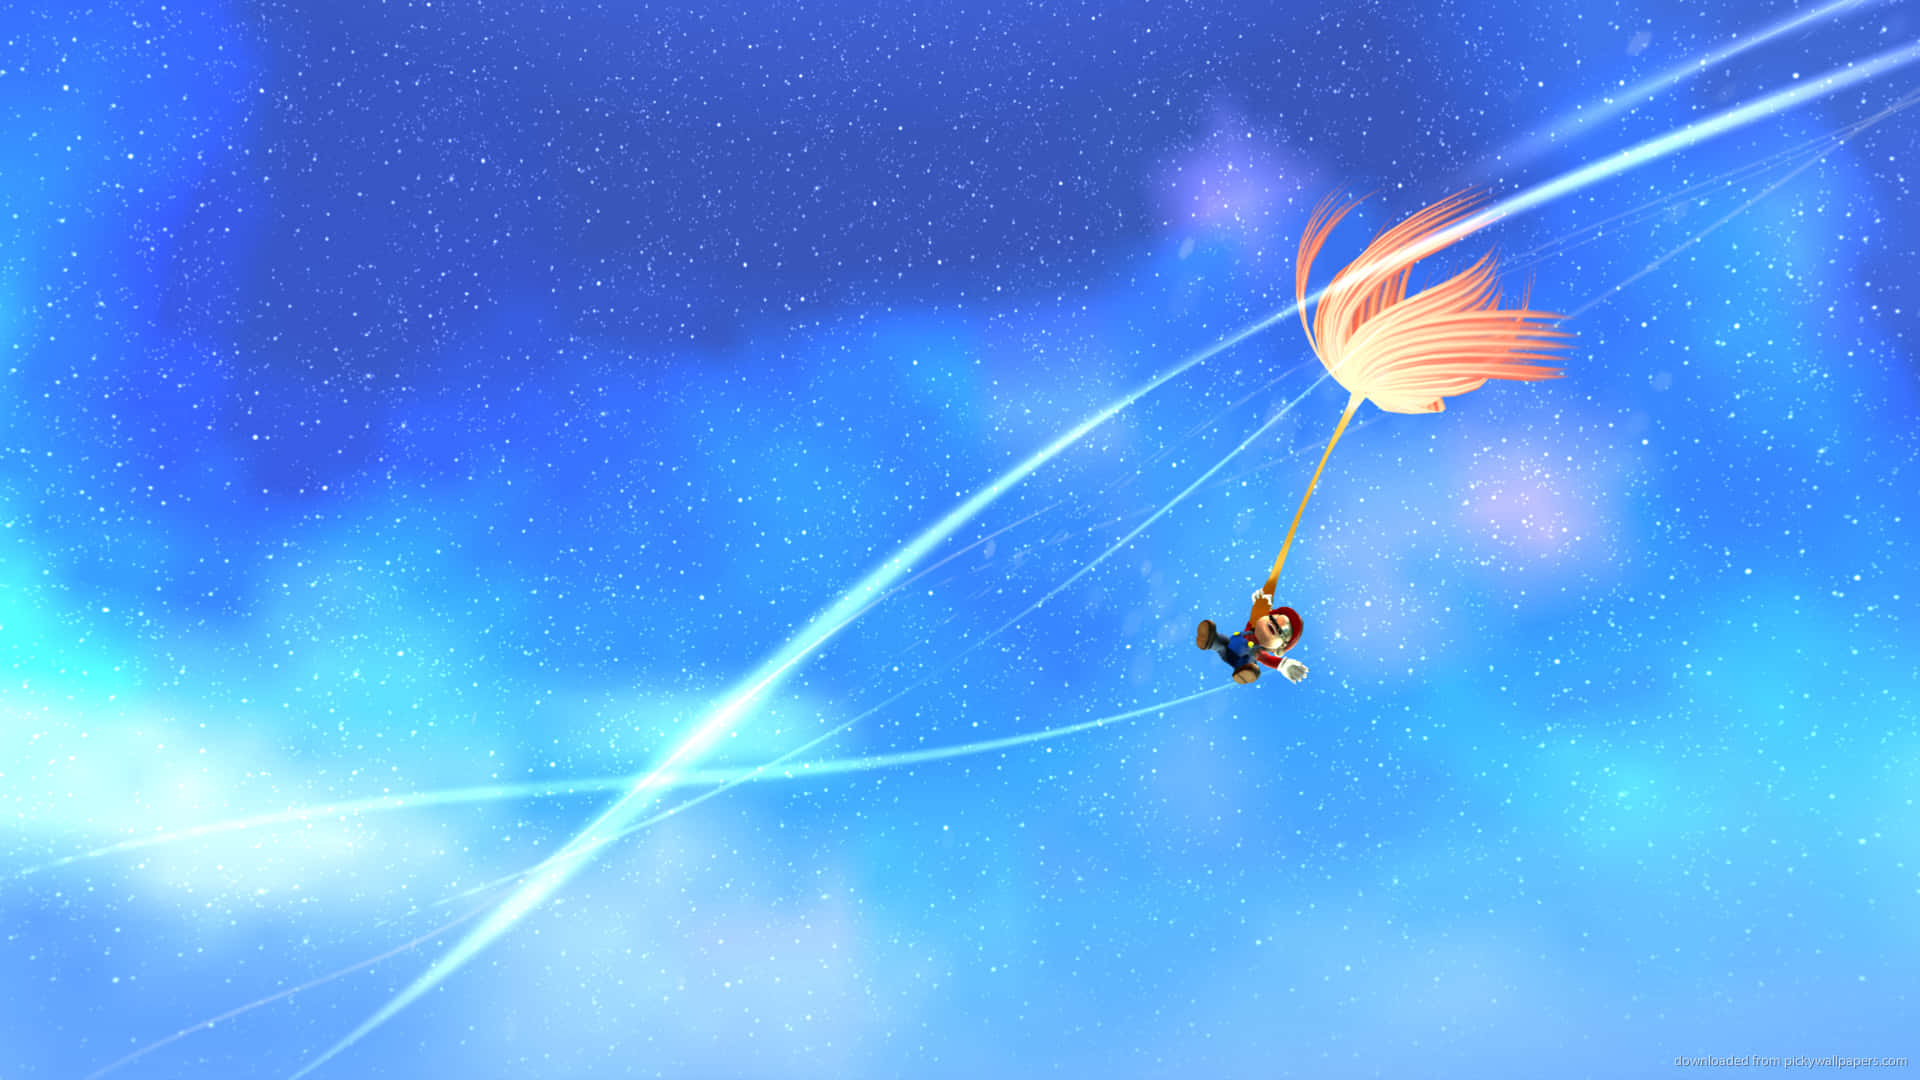 Travel through space with Mario and explore the new galaxies of Super Mario Galaxy! Wallpaper